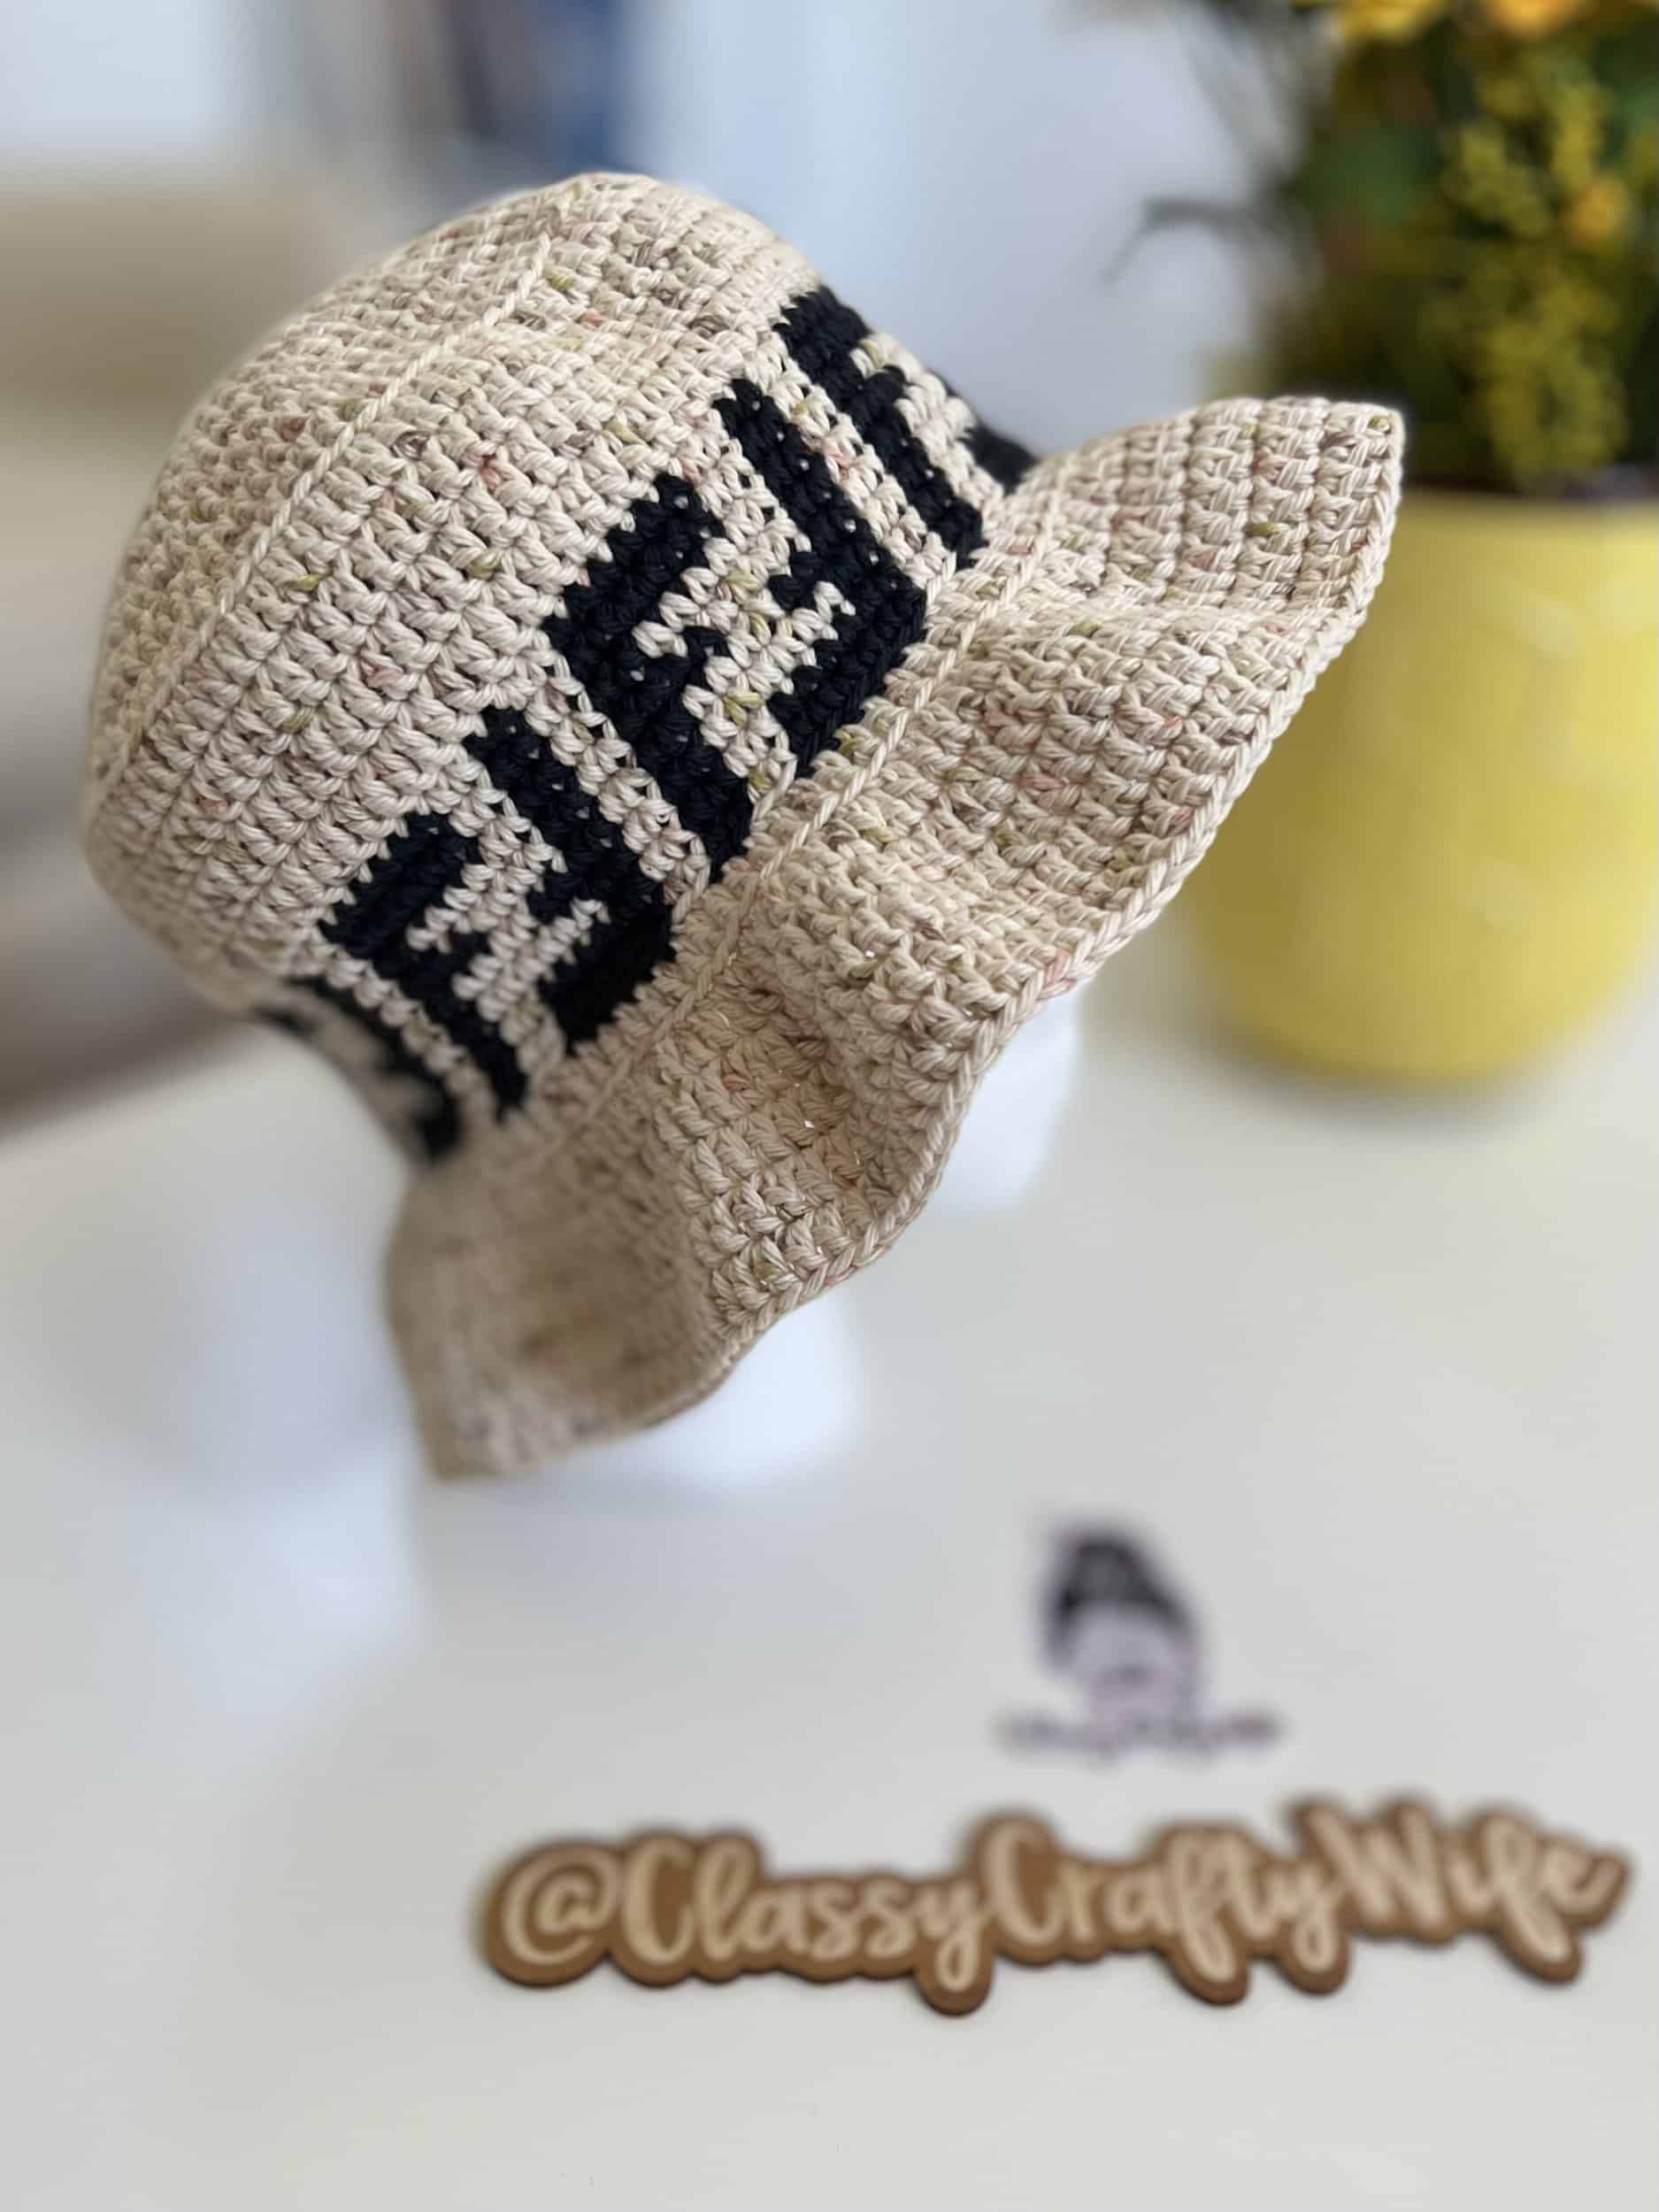 This Fendi Imitation - Crochet Handmade Bucket Hat is made with love by Classy Crafty Wife! Shop more unique gift ideas today with Spots Initiatives, the best way to support creators.